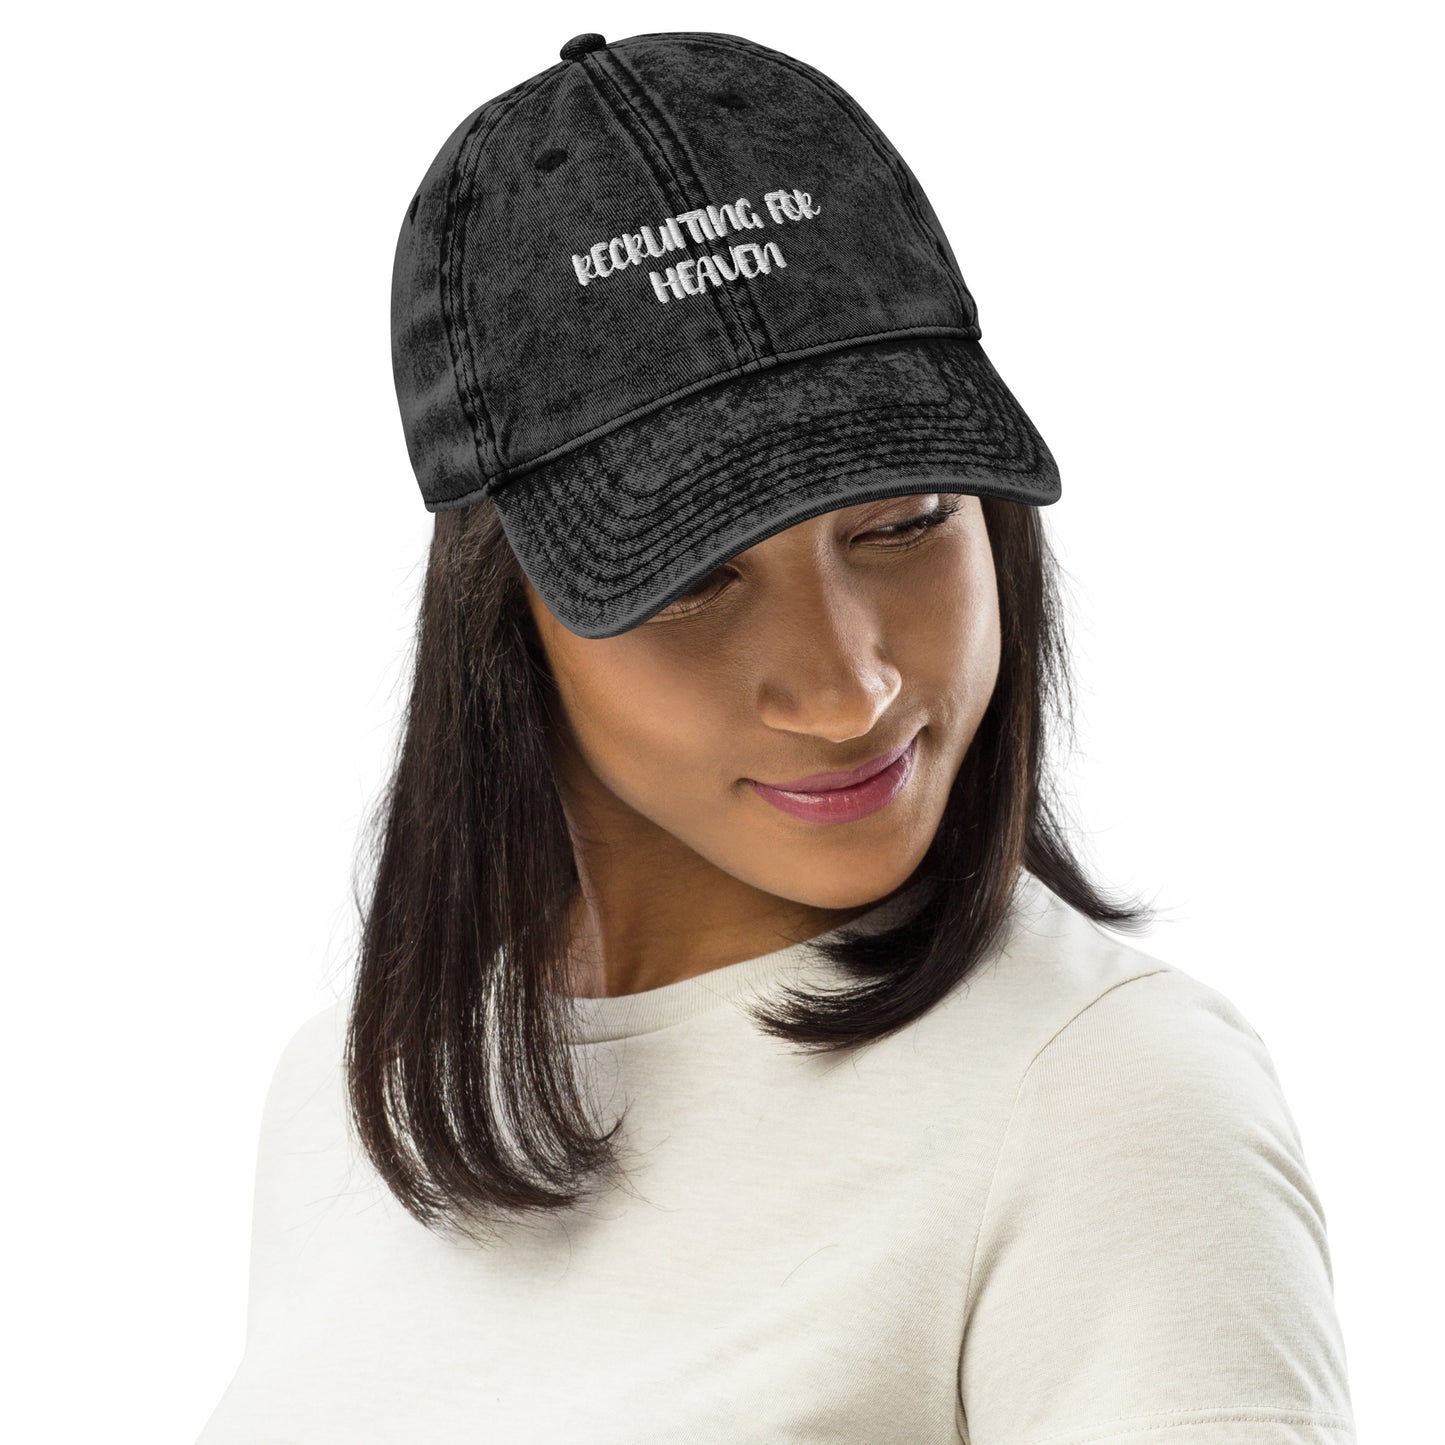 Recruiting for Heaven Vintage Hat